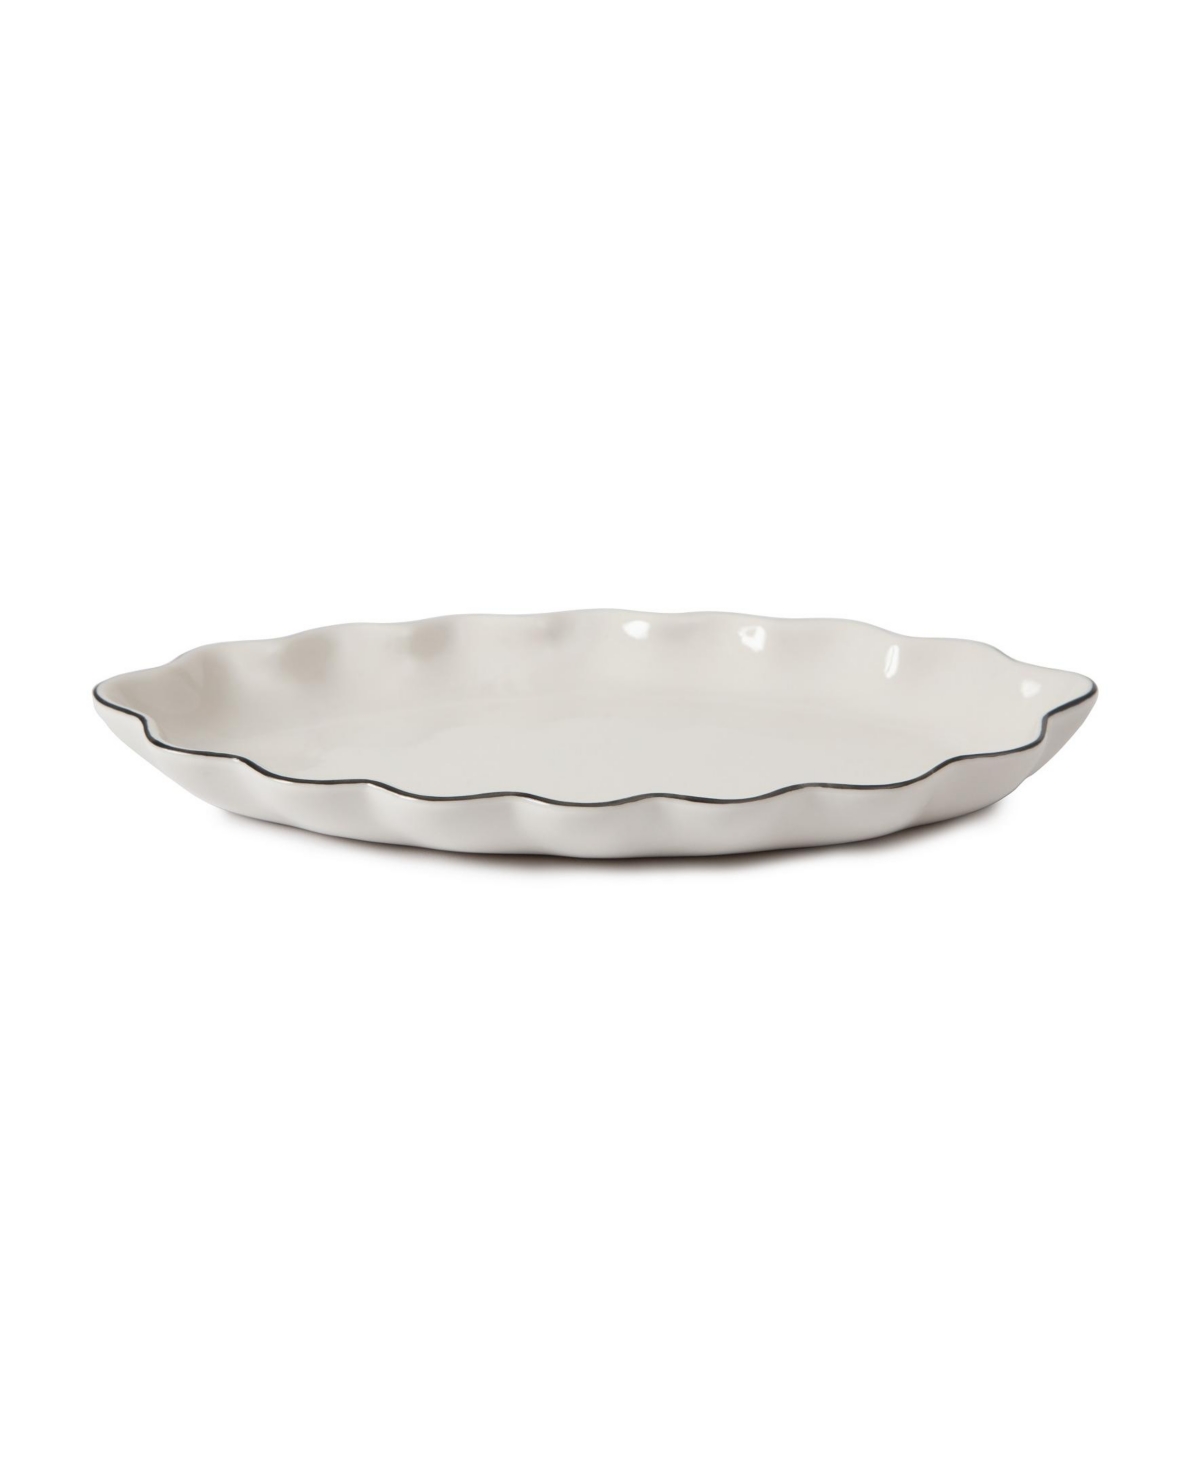 Mare Tray - White with Black Trim